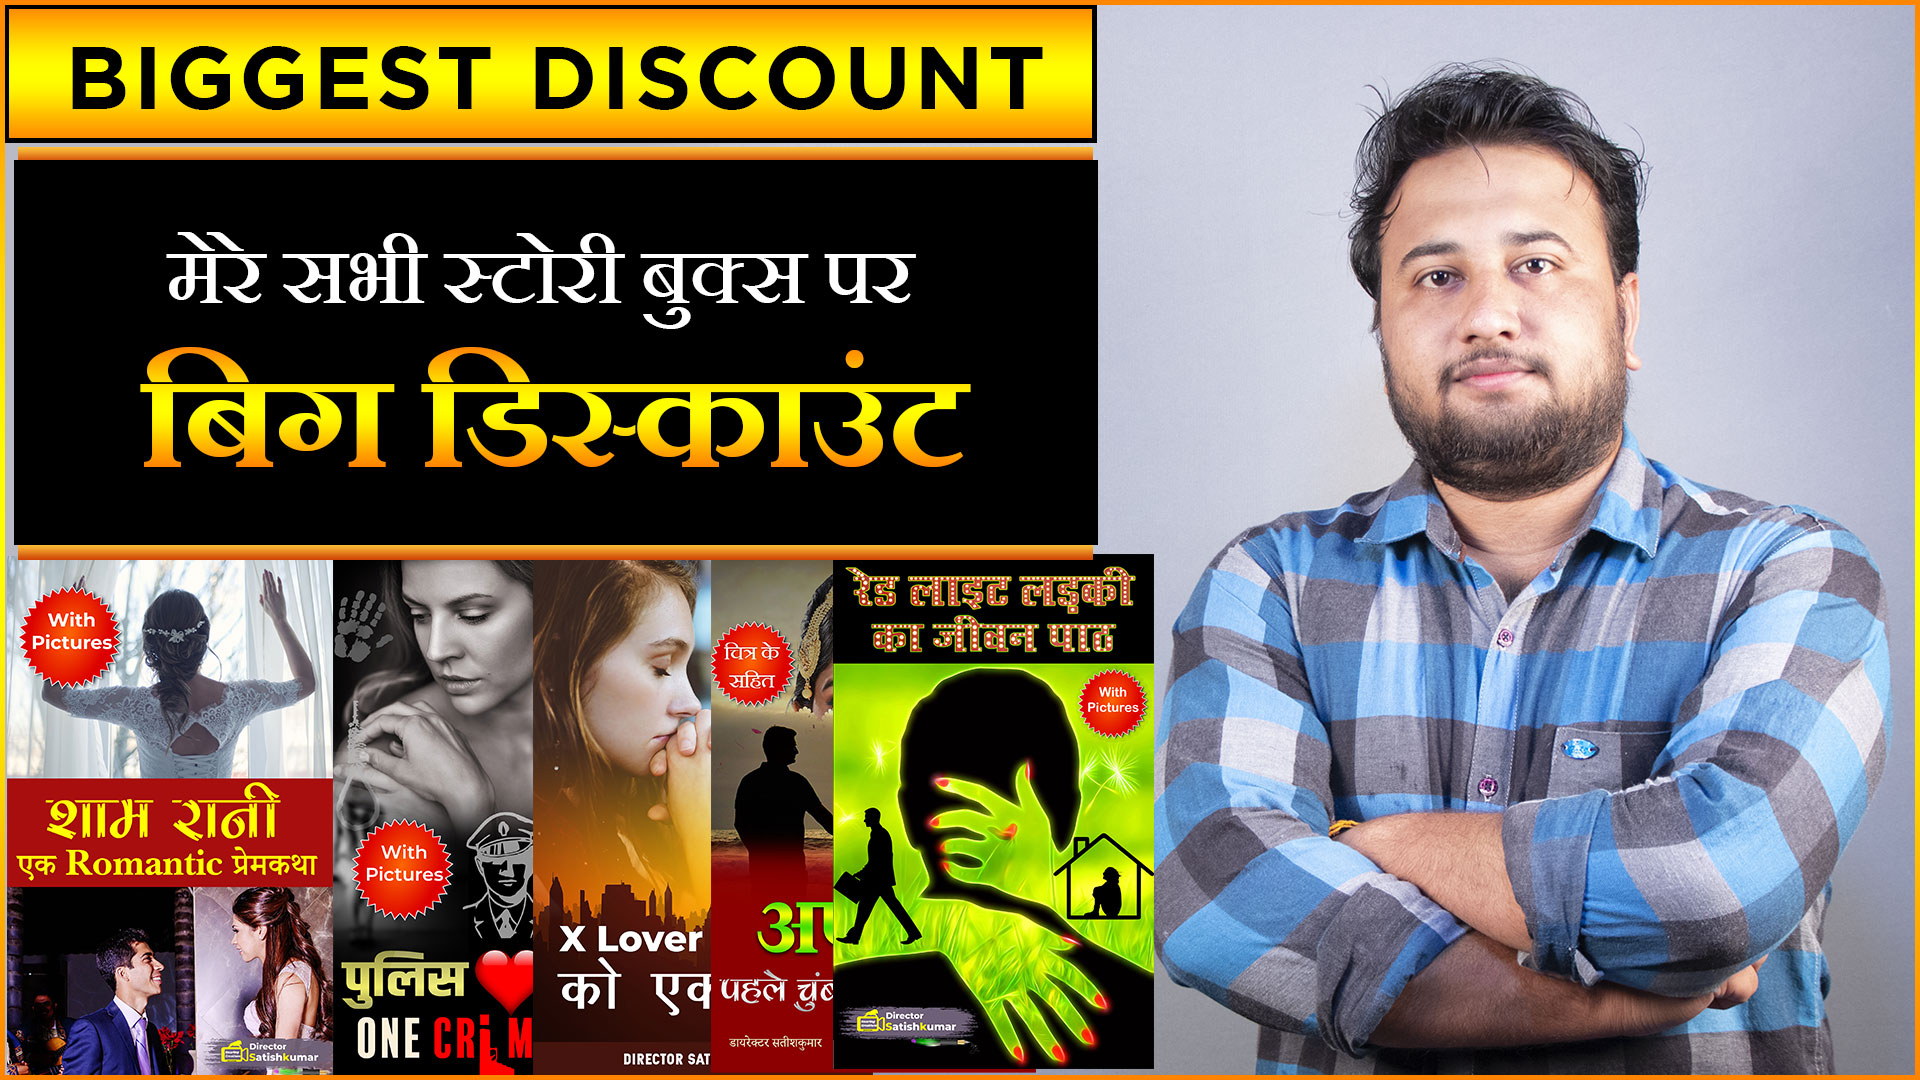 You are currently viewing मेरे सभी स्टोरी बुक्स पर बिग डिस्काउंट । Biggest Discount on Director Satishkumar Story Books